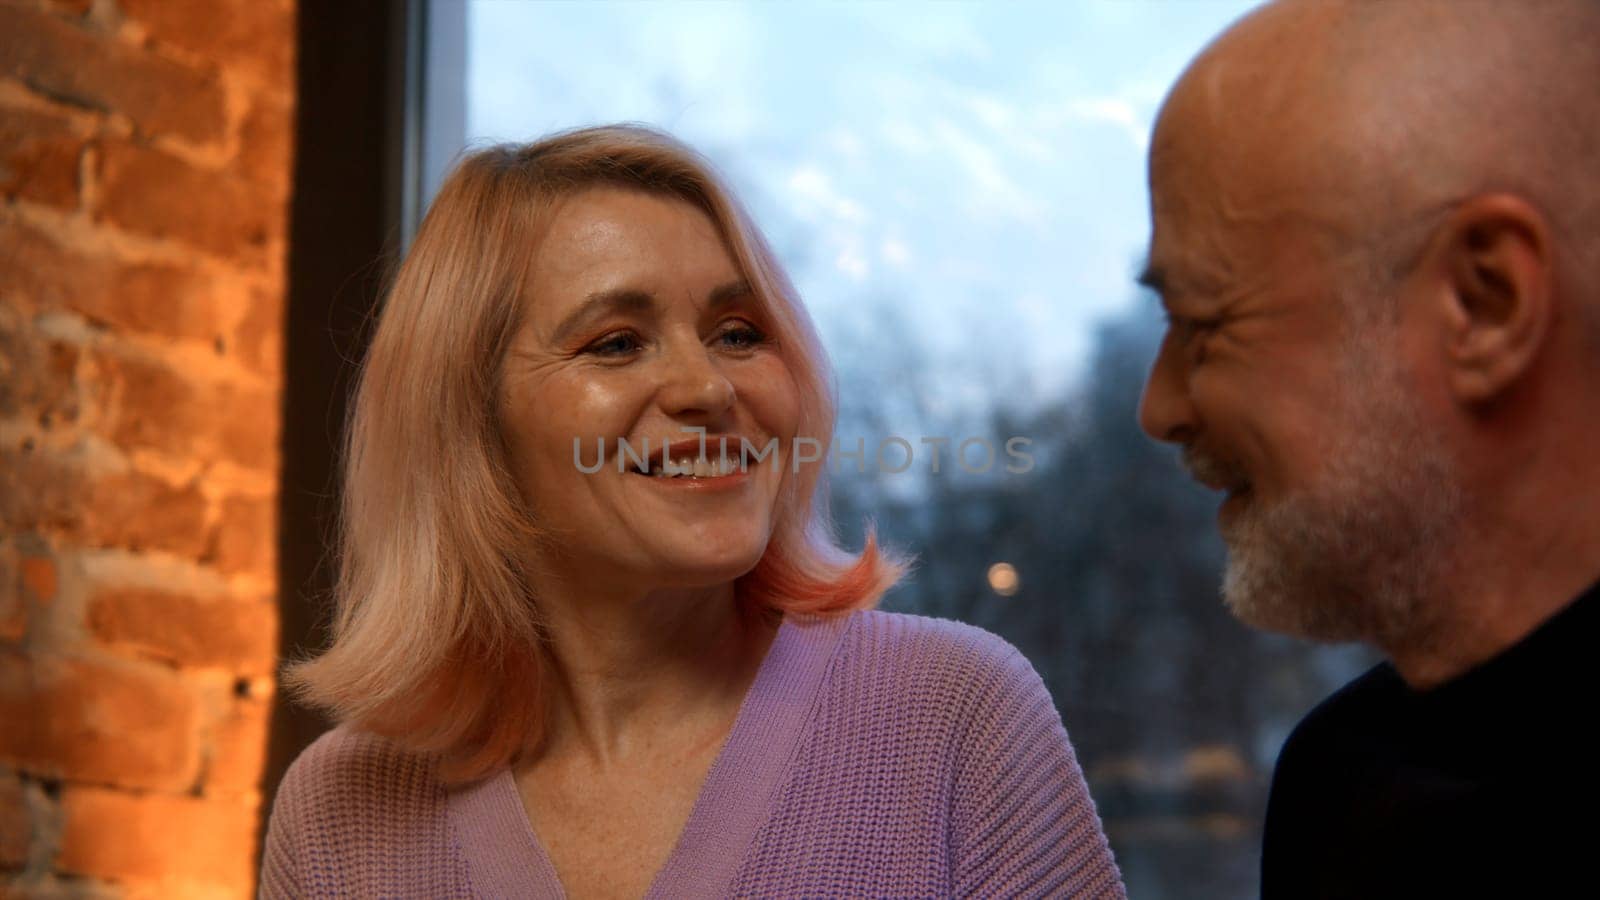 Happy middle aged mature couple talking to each other at the restaurant in the evening. Stock footage. Concept of marriage and long lasting romantic relationships. by Mediawhalestock